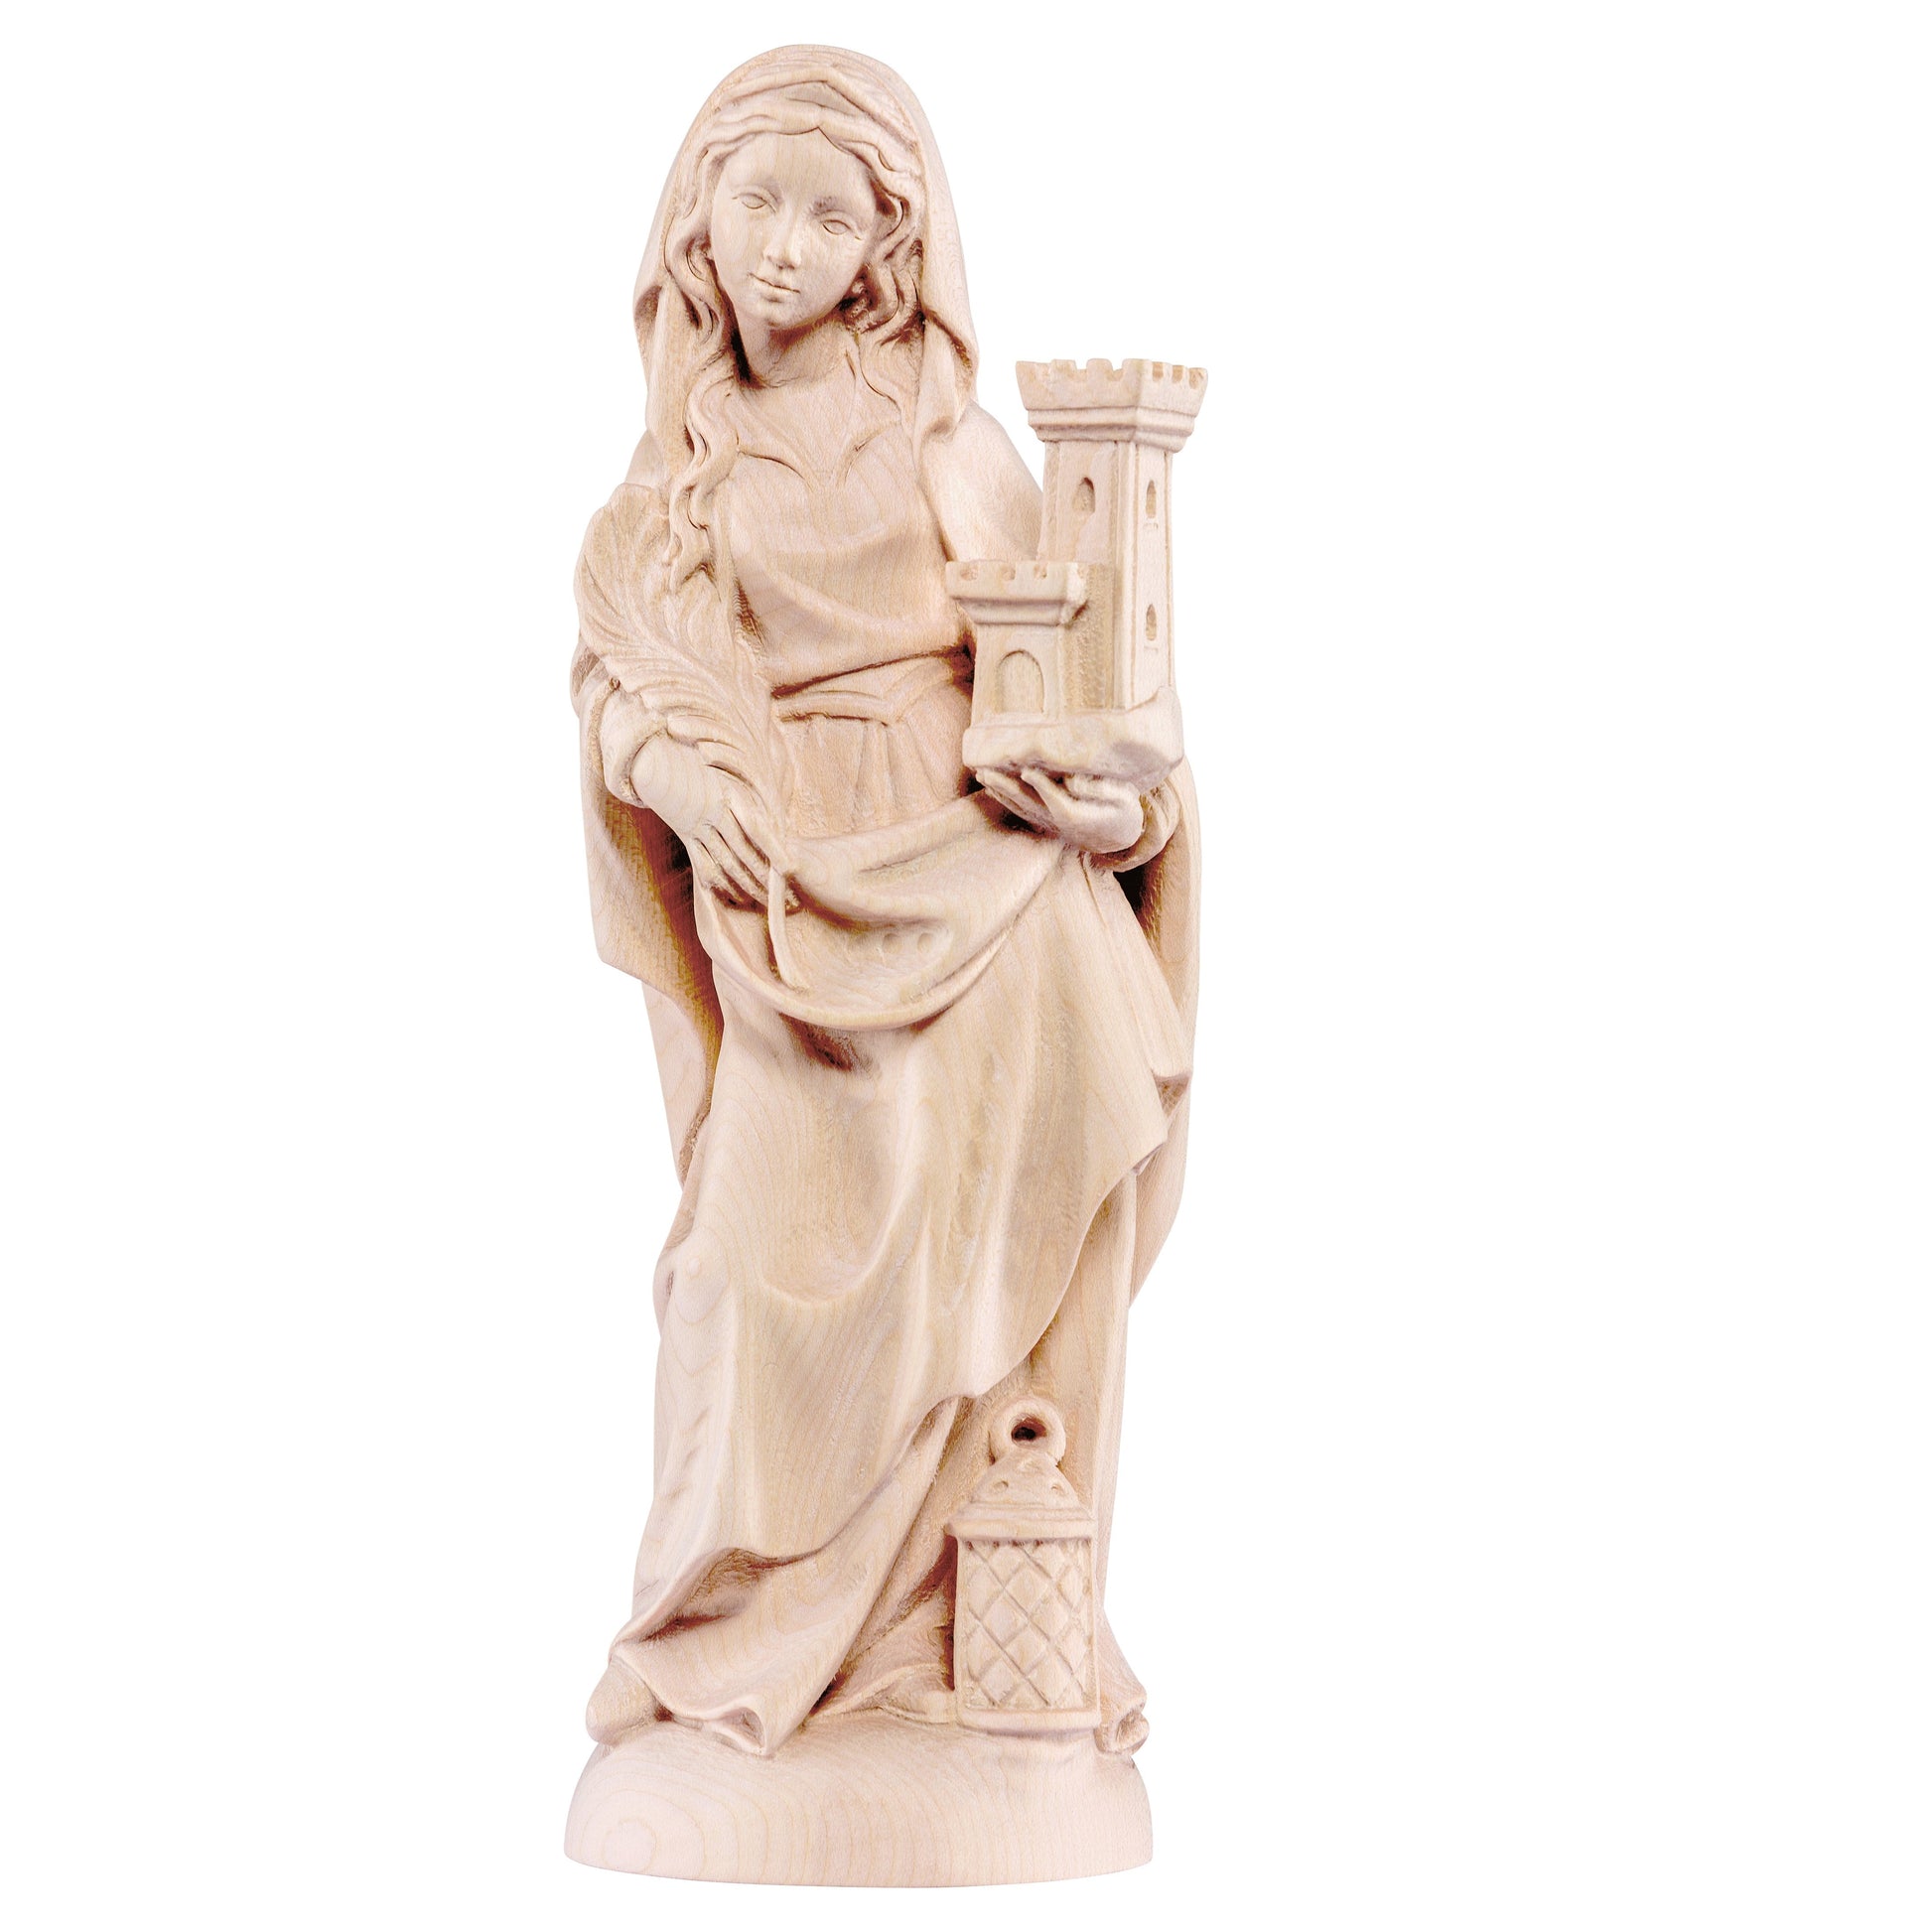 Mondo Cattolico Natural / 30 cm (11.8 in) Wooden statue of St. Barbara gothic style